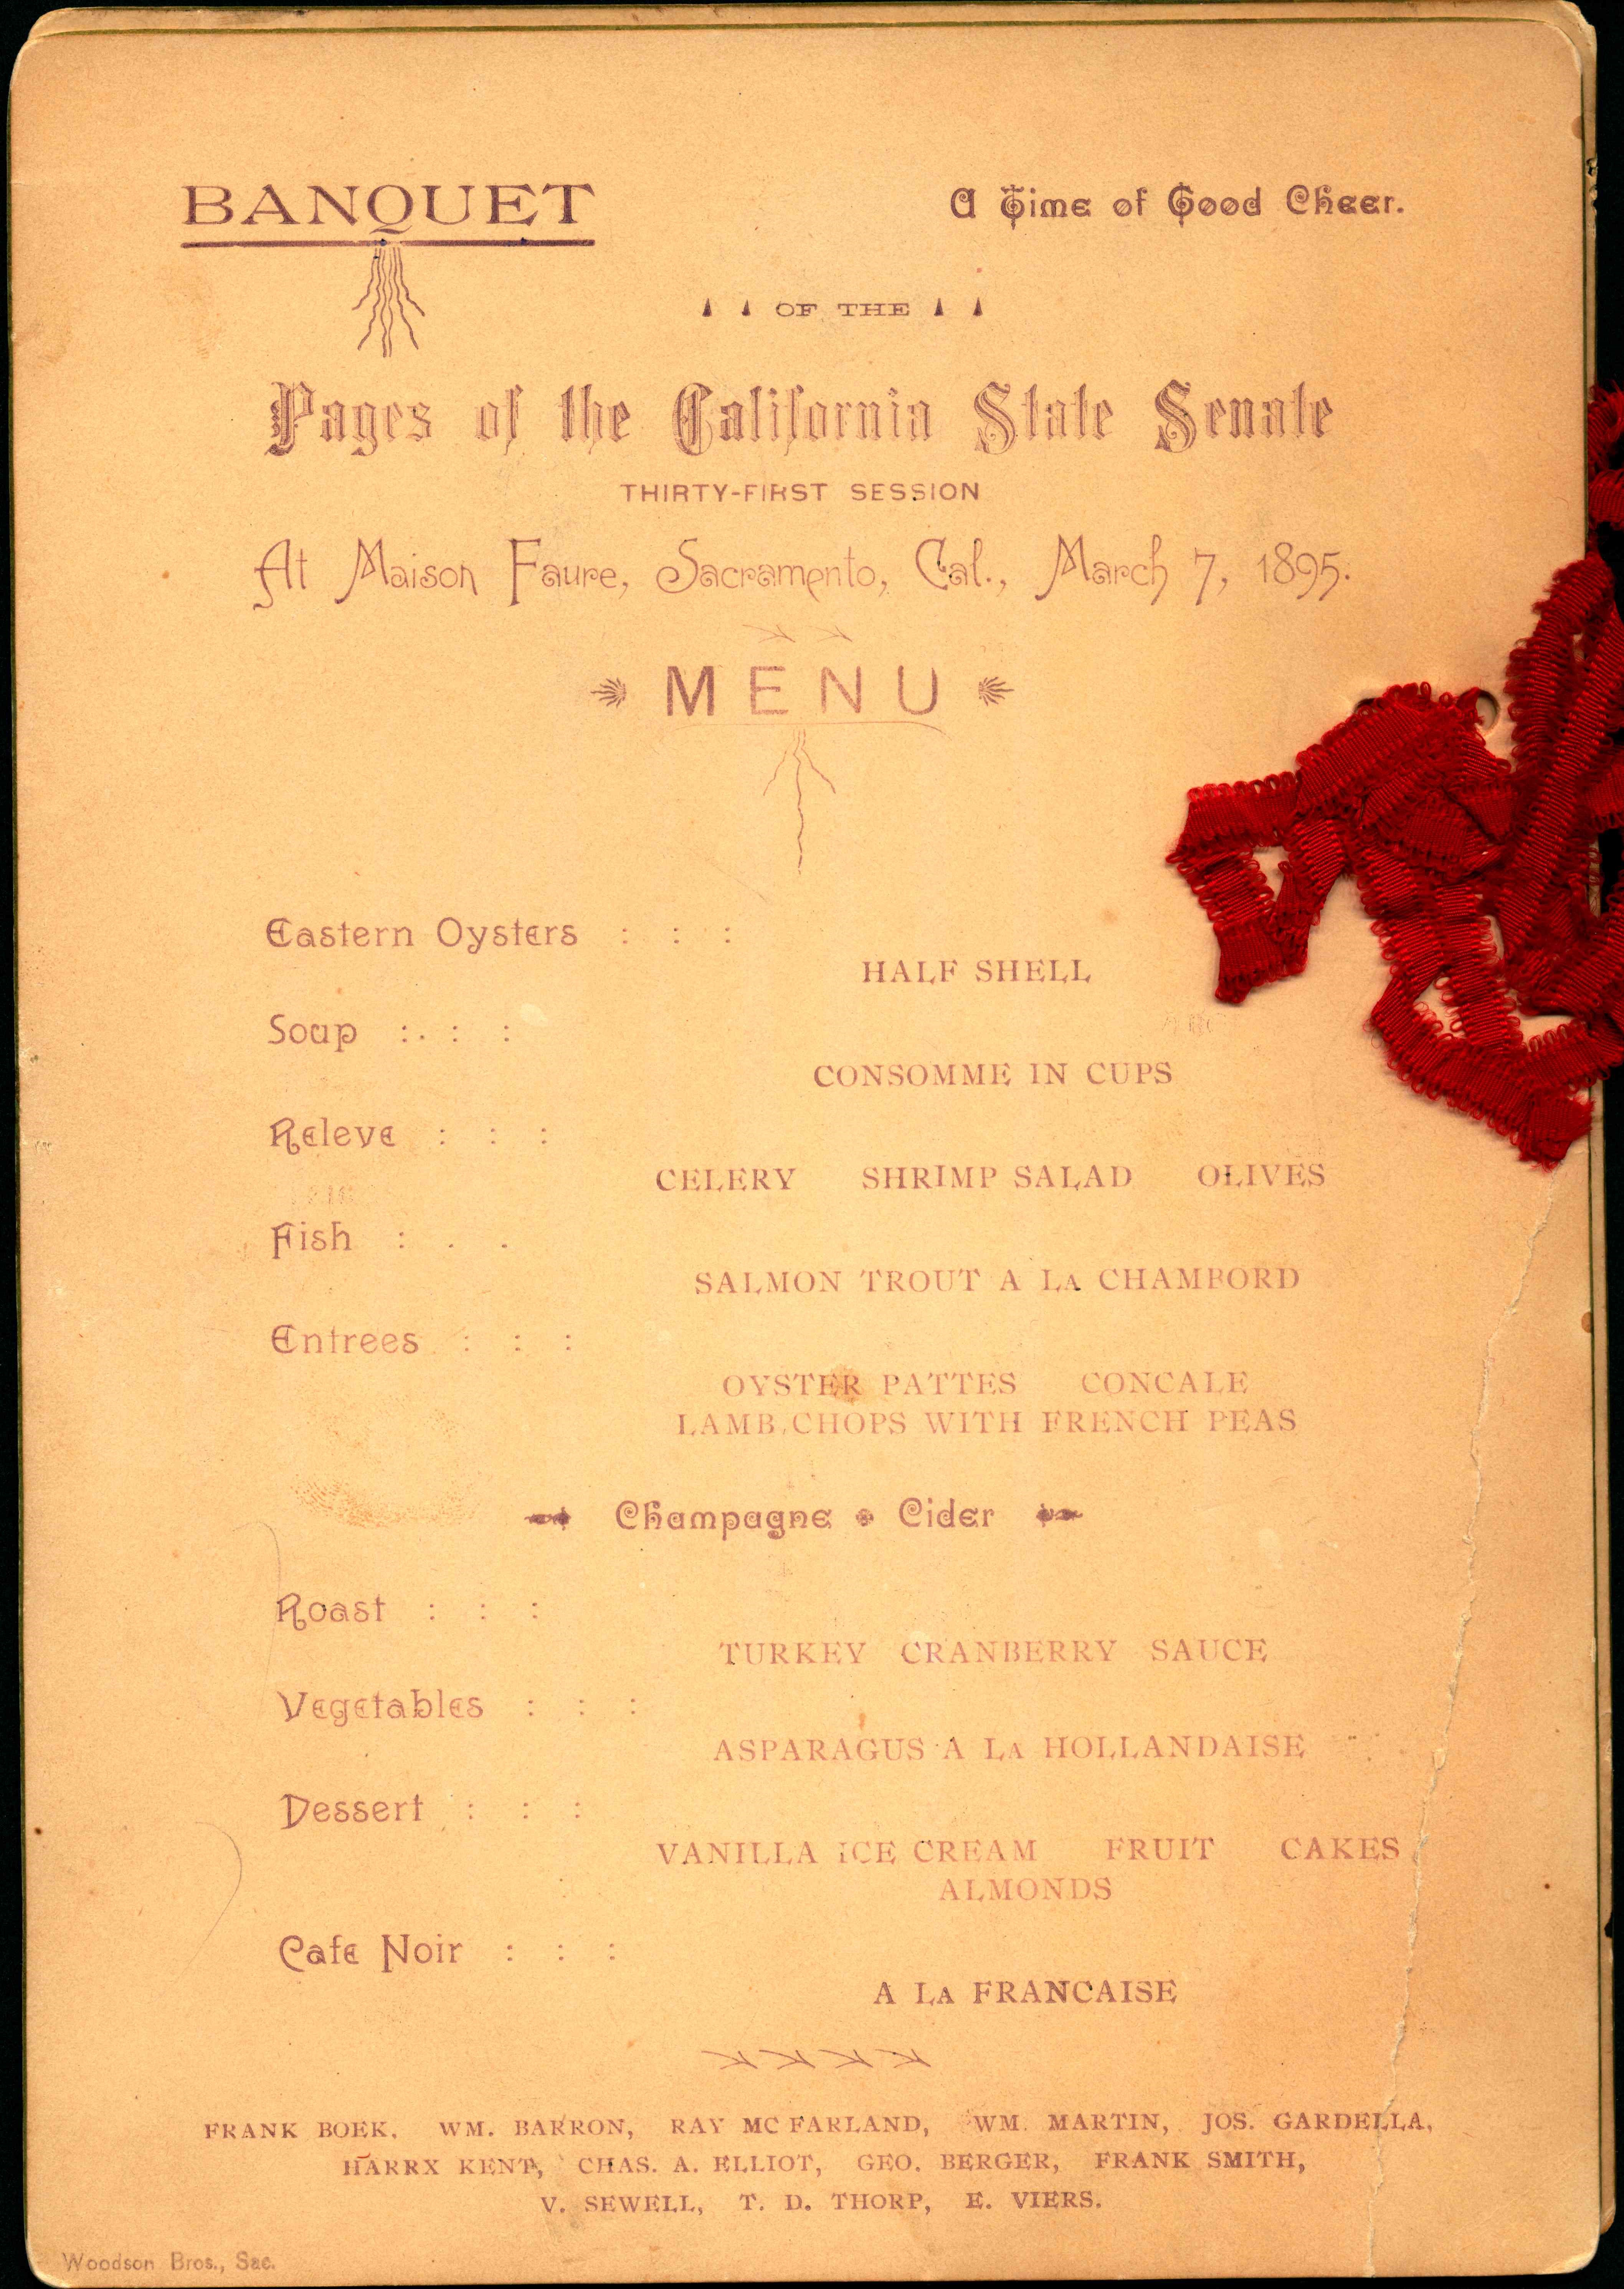 A red bow holding the menu together